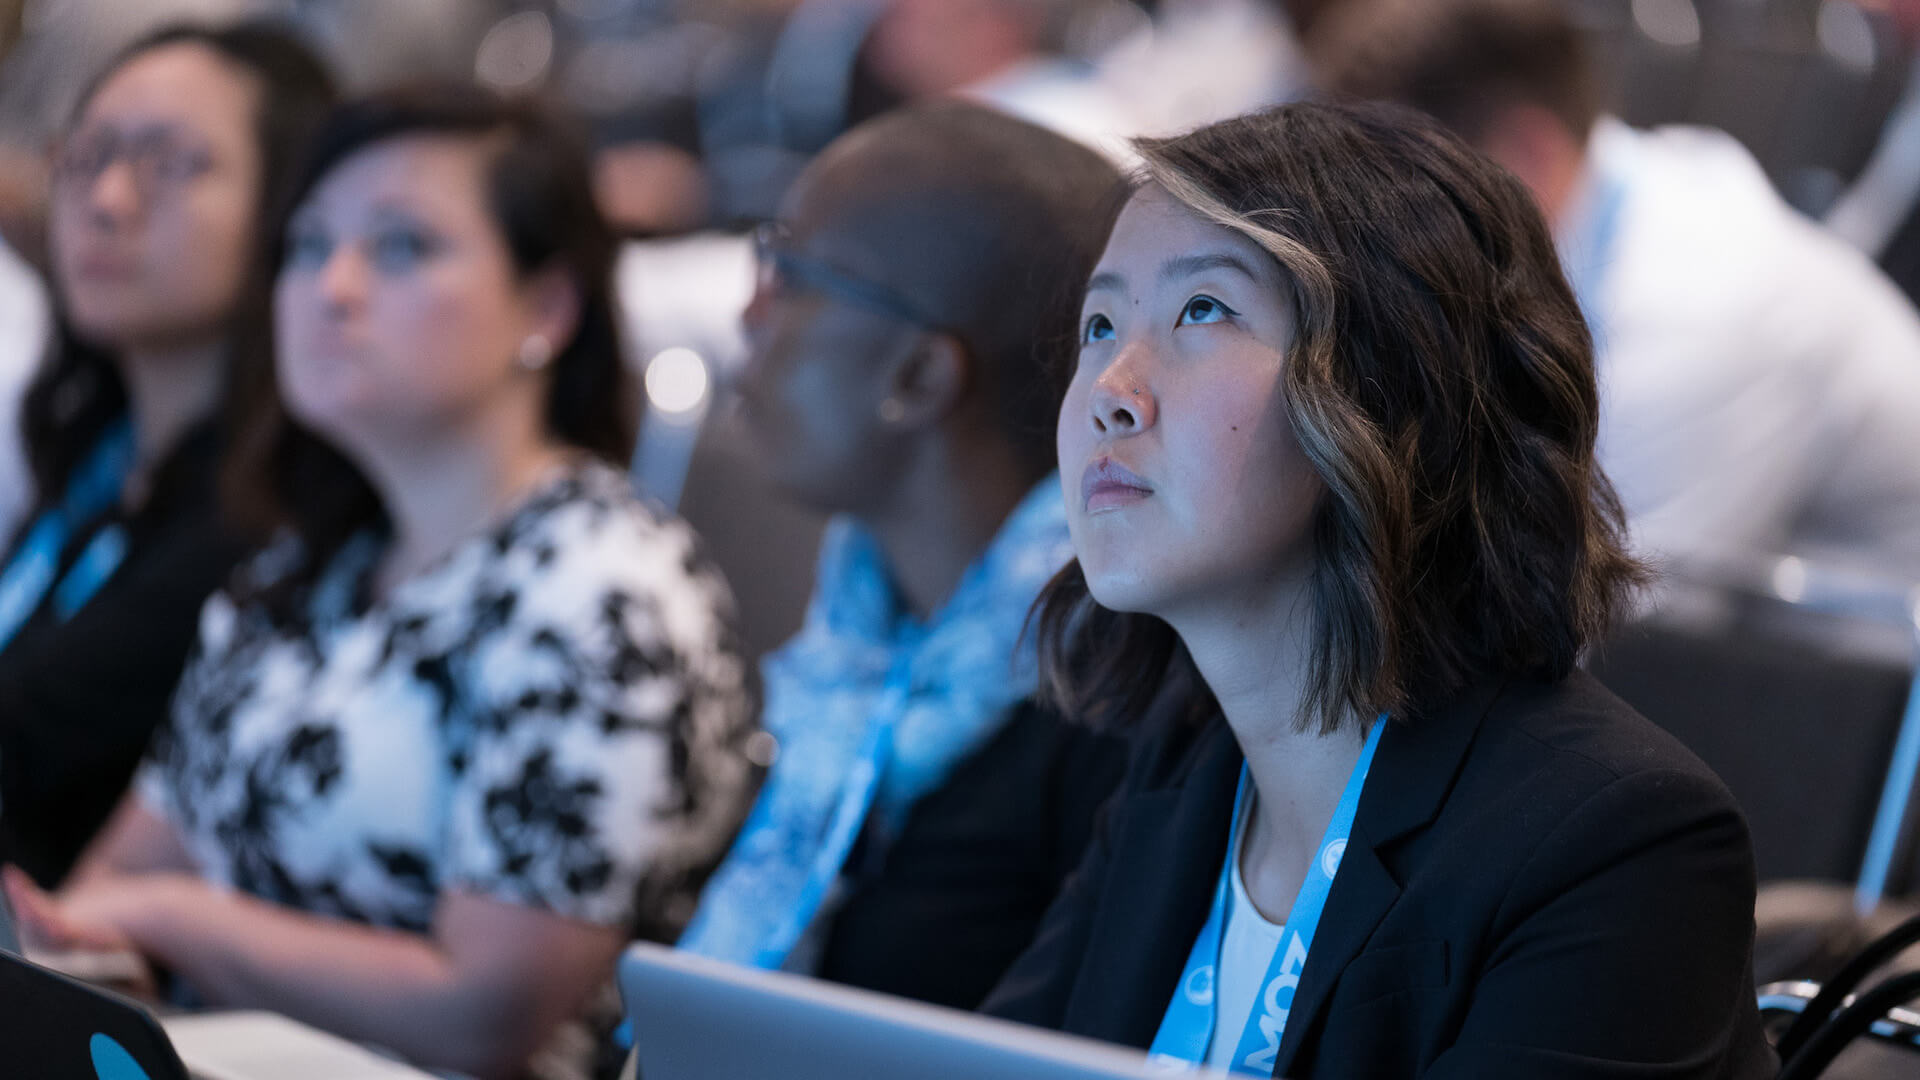 Check out the SEO & SEM sessions coming to SMX East